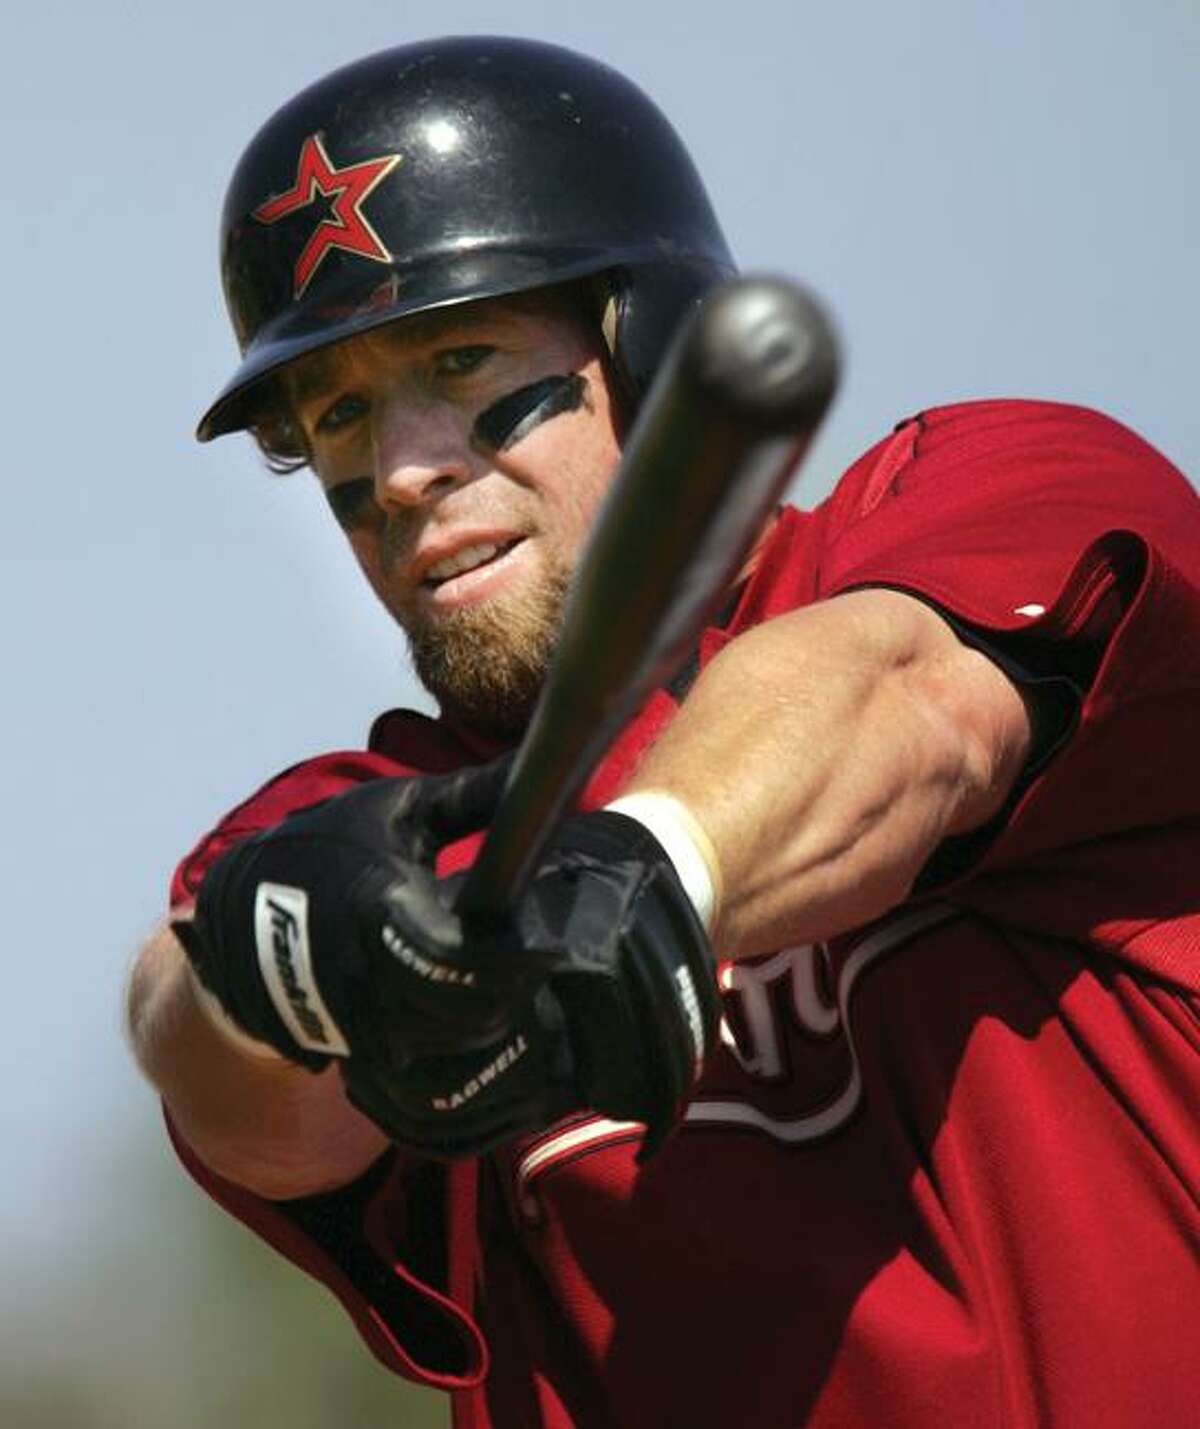 In this March 6, 2006, file photo, Houston Astros' Jeff Bagwell warms up before the start of a spring training baseball game, in Kissimmee, Fla. The Astros announced Sunday that Bagwell, who has been serving as a special assistant to the general manager, will replace hitting coach Sean Berry after the All-Star break. (AP Photo/Steven Senne)